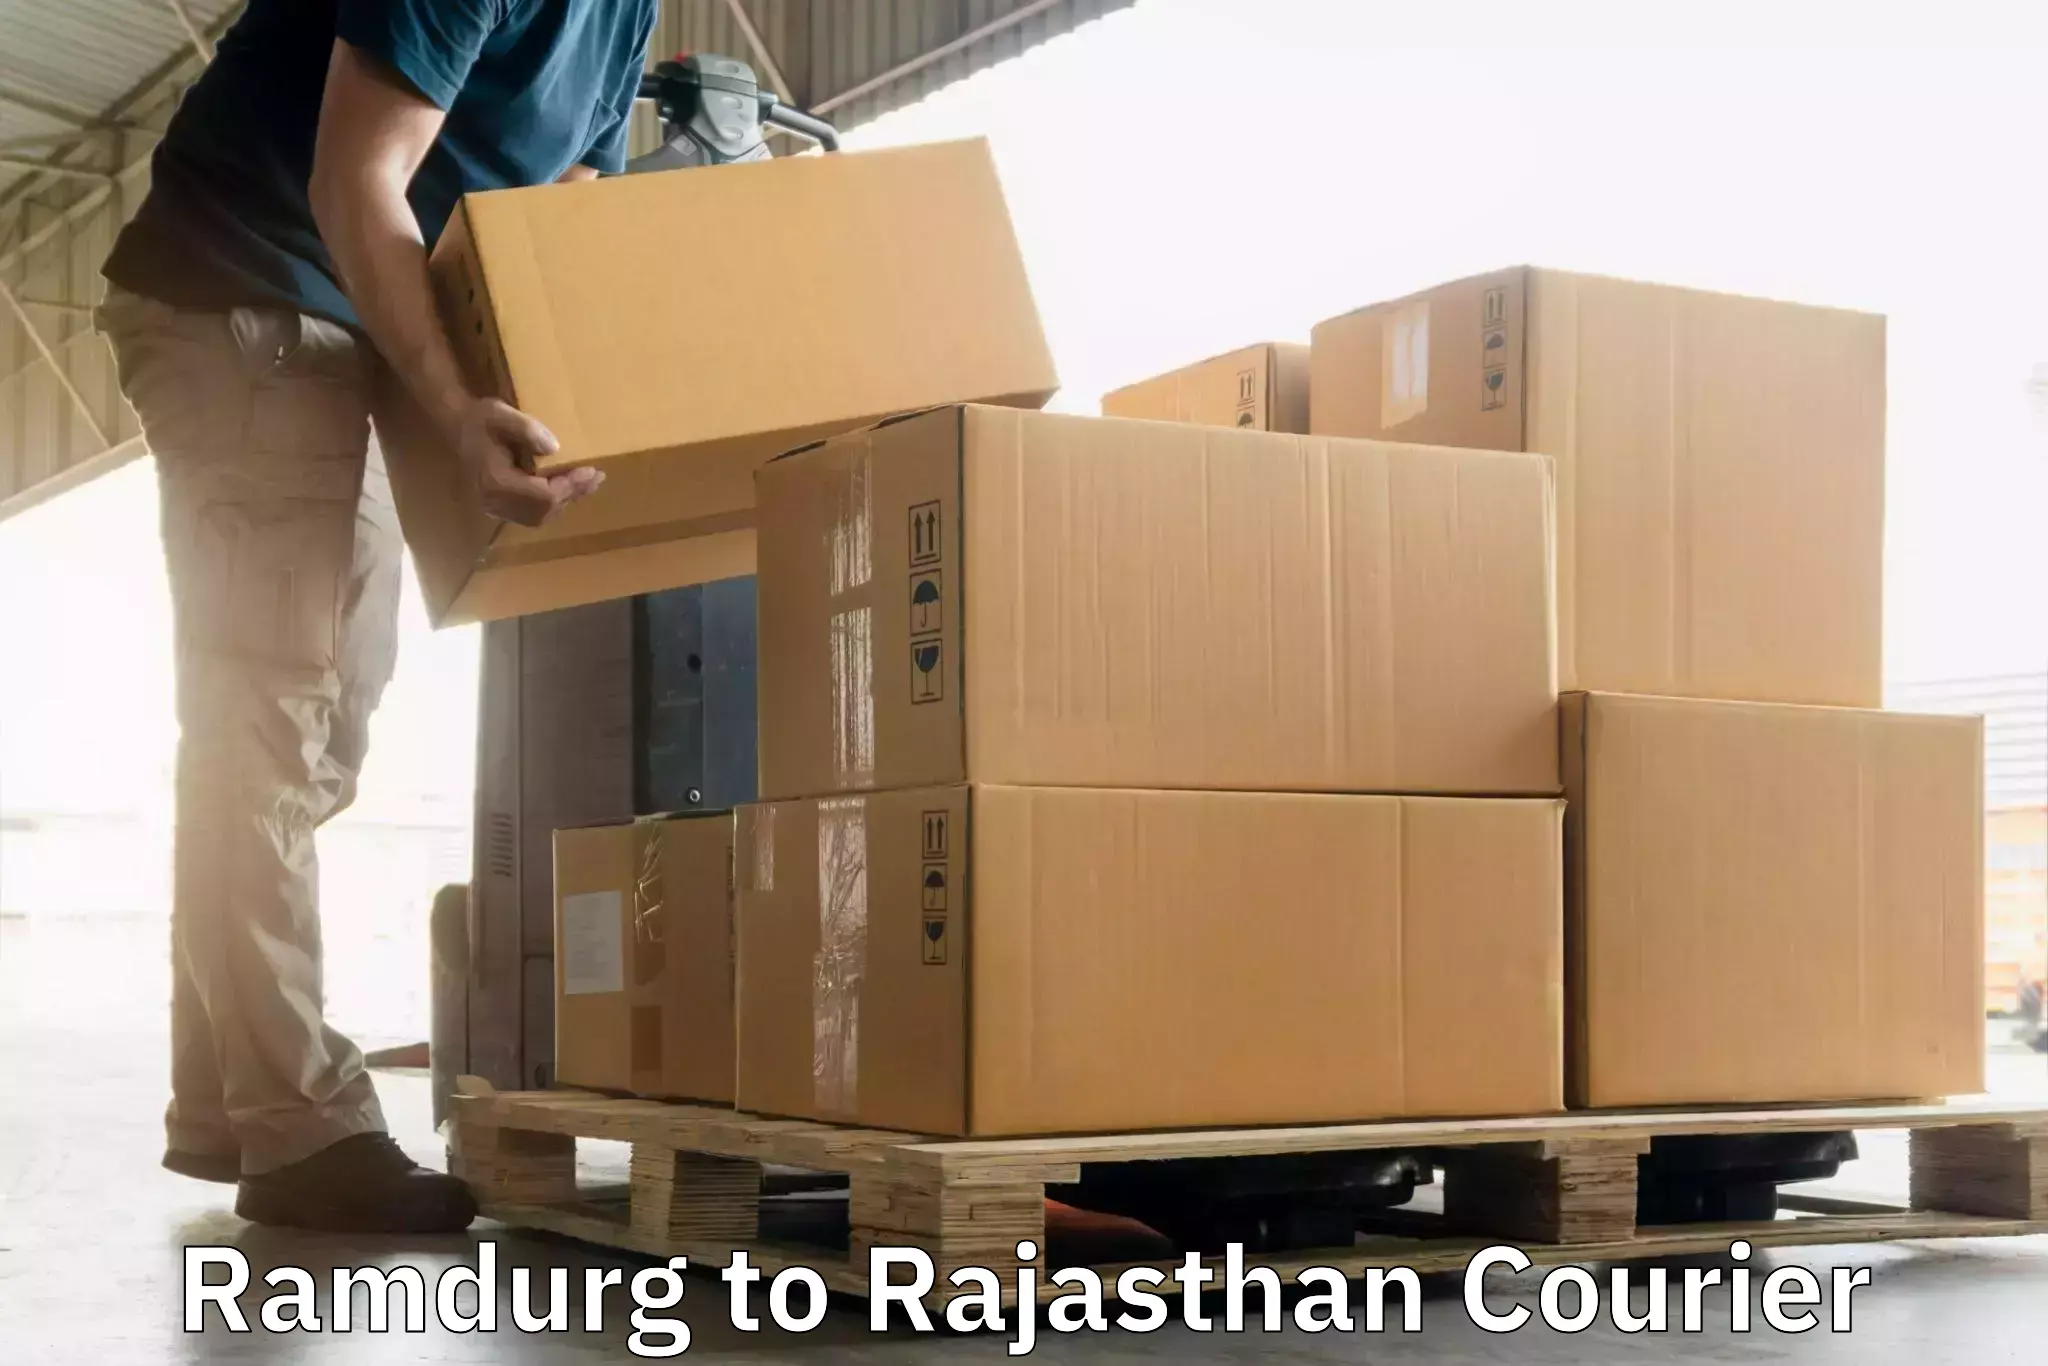 Sustainable courier practices Ramdurg to Pali